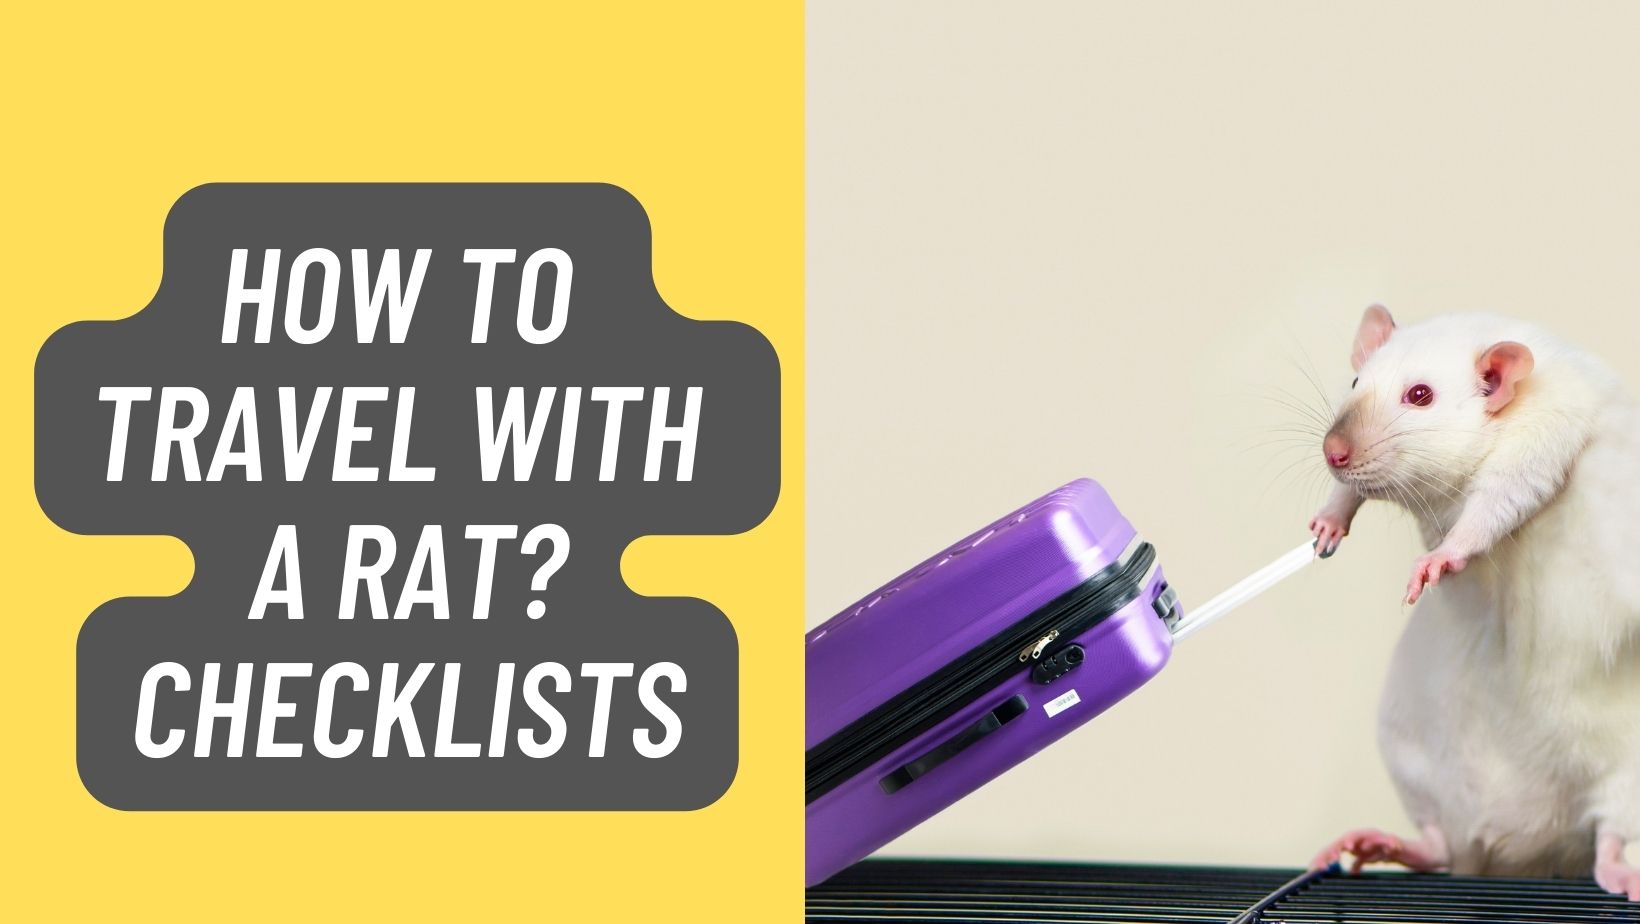 How to Travel with a Rat? Checklists